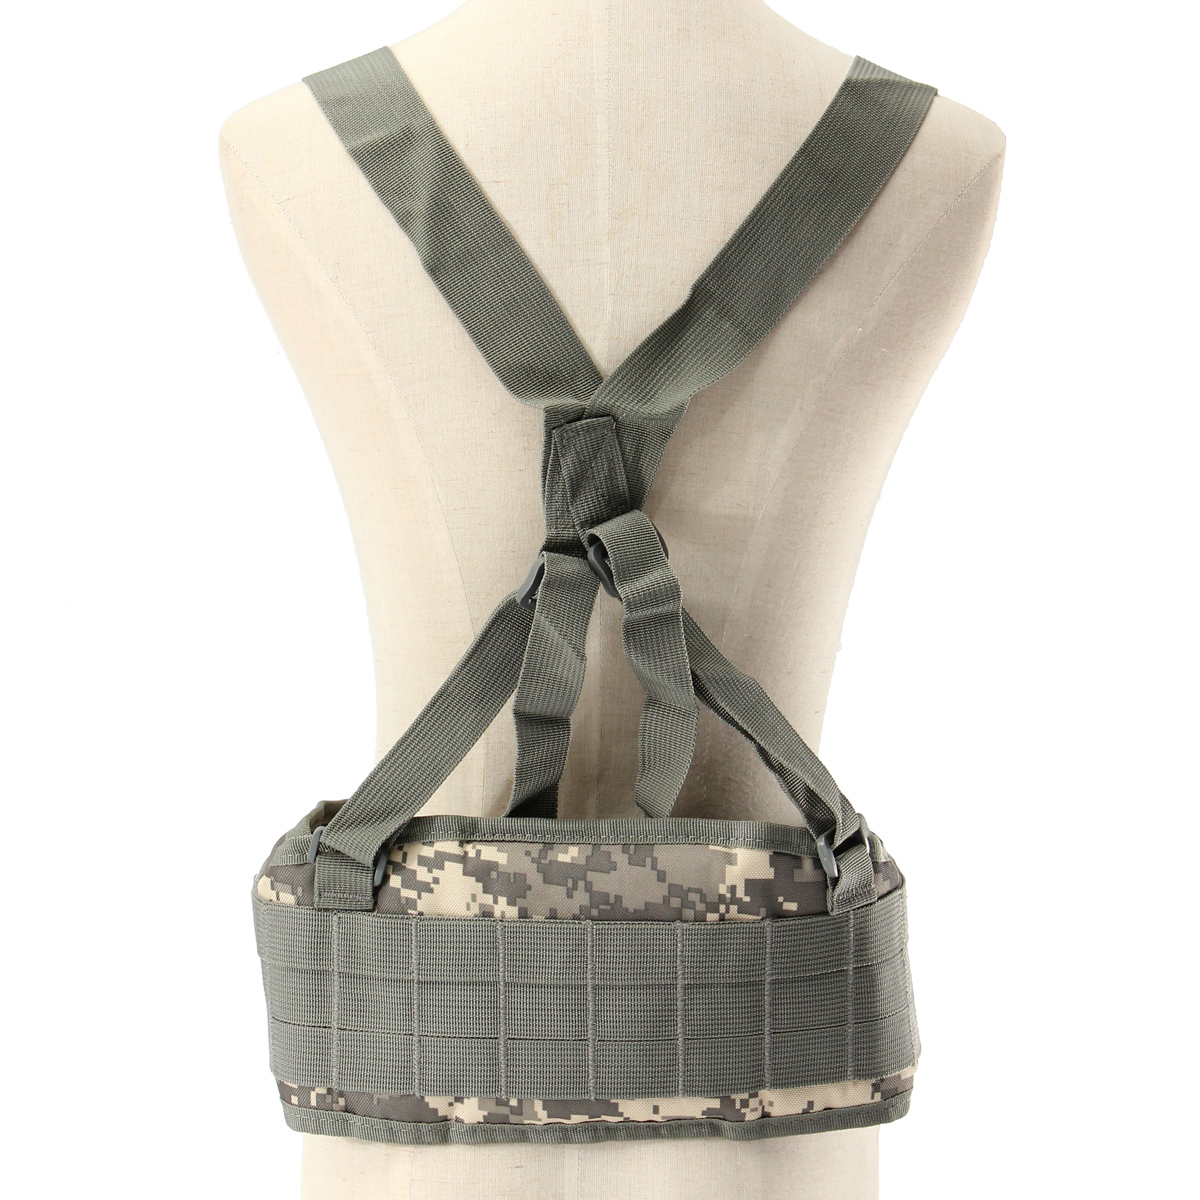 Military-Nylon-Molle-Waist-Combat-Belt-With-Harness-Tactical-Adjustable-Soft-Padded-Universal-Unisex-1817236-3